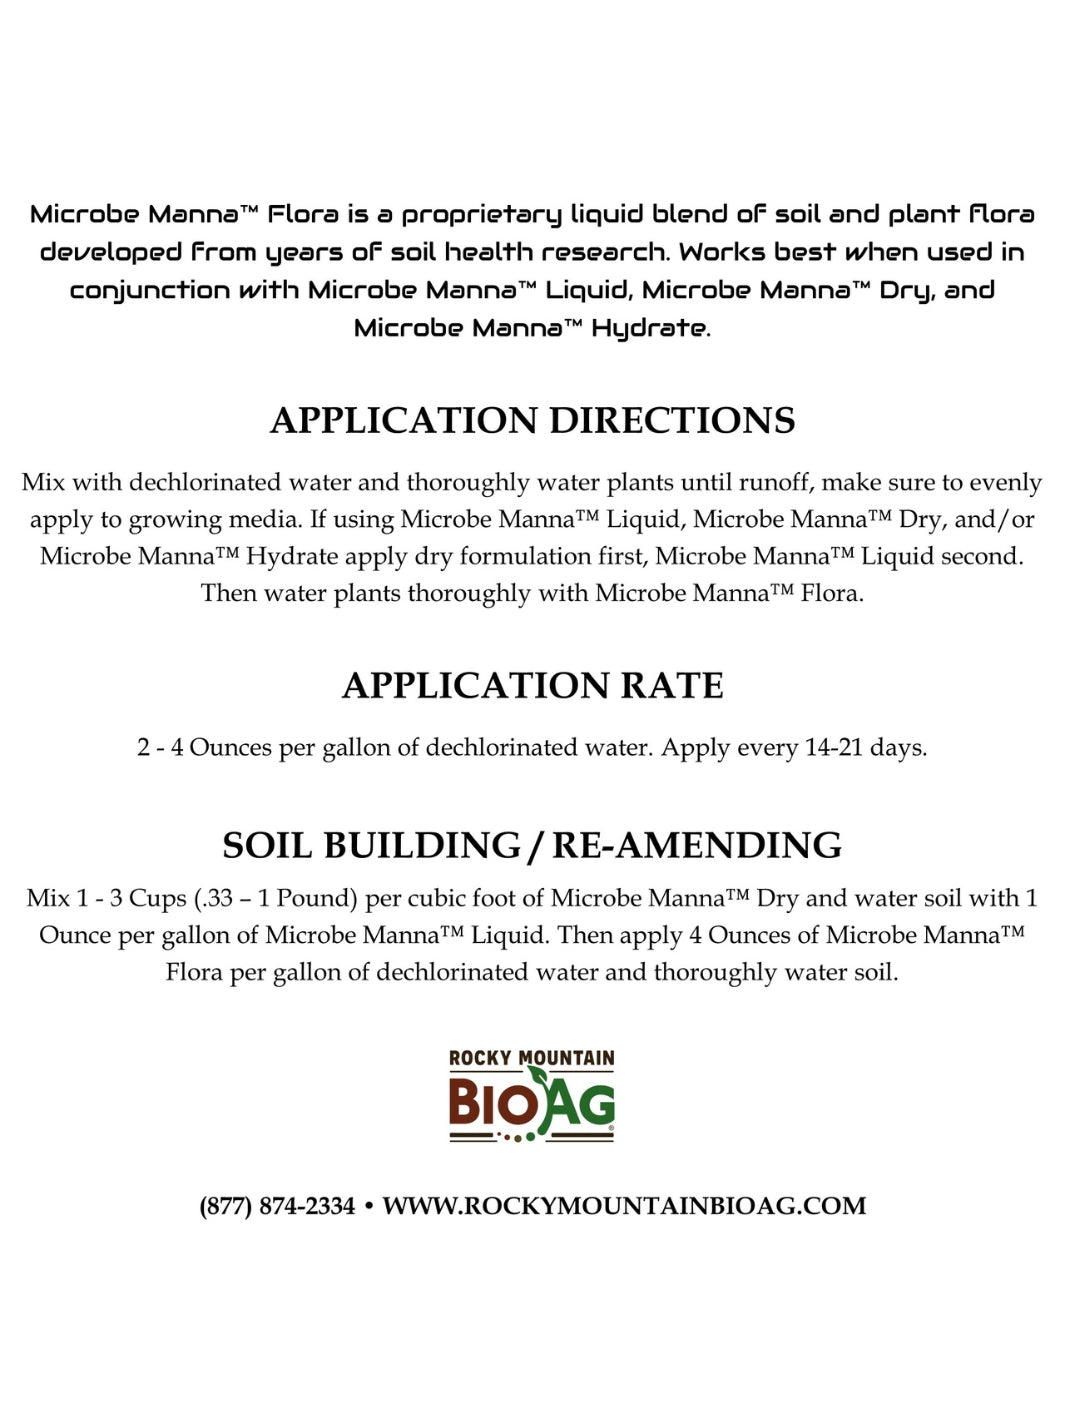 Microbe Manna Flora Soil Microbes Nutrition Blend Directions and Application Rate